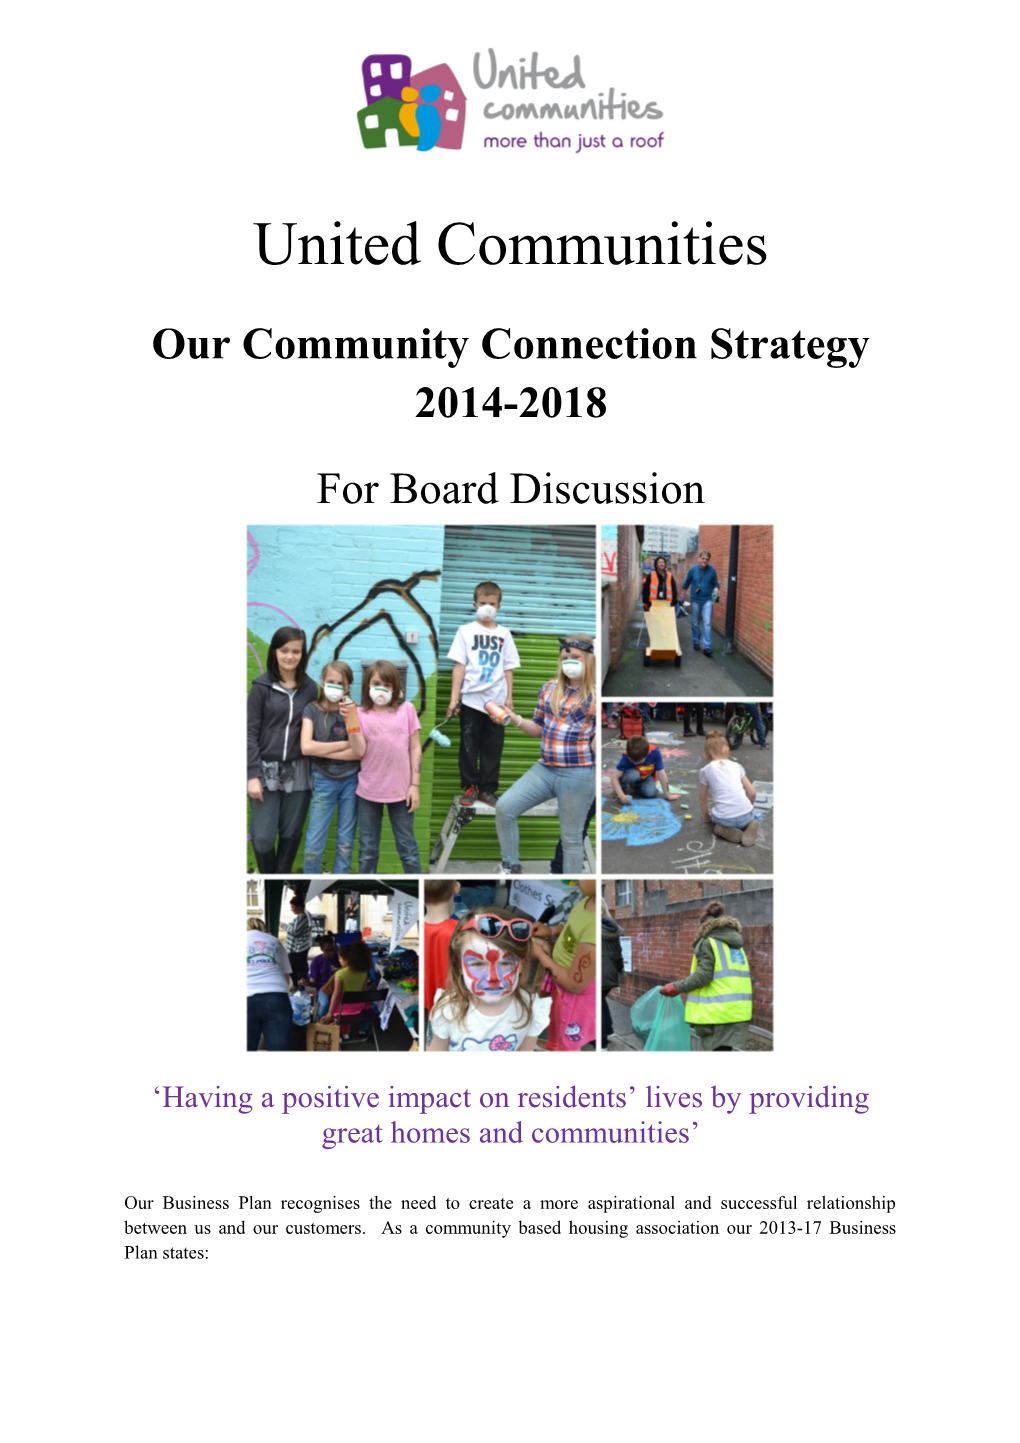 Our Community Connection Strategy 2014-2018